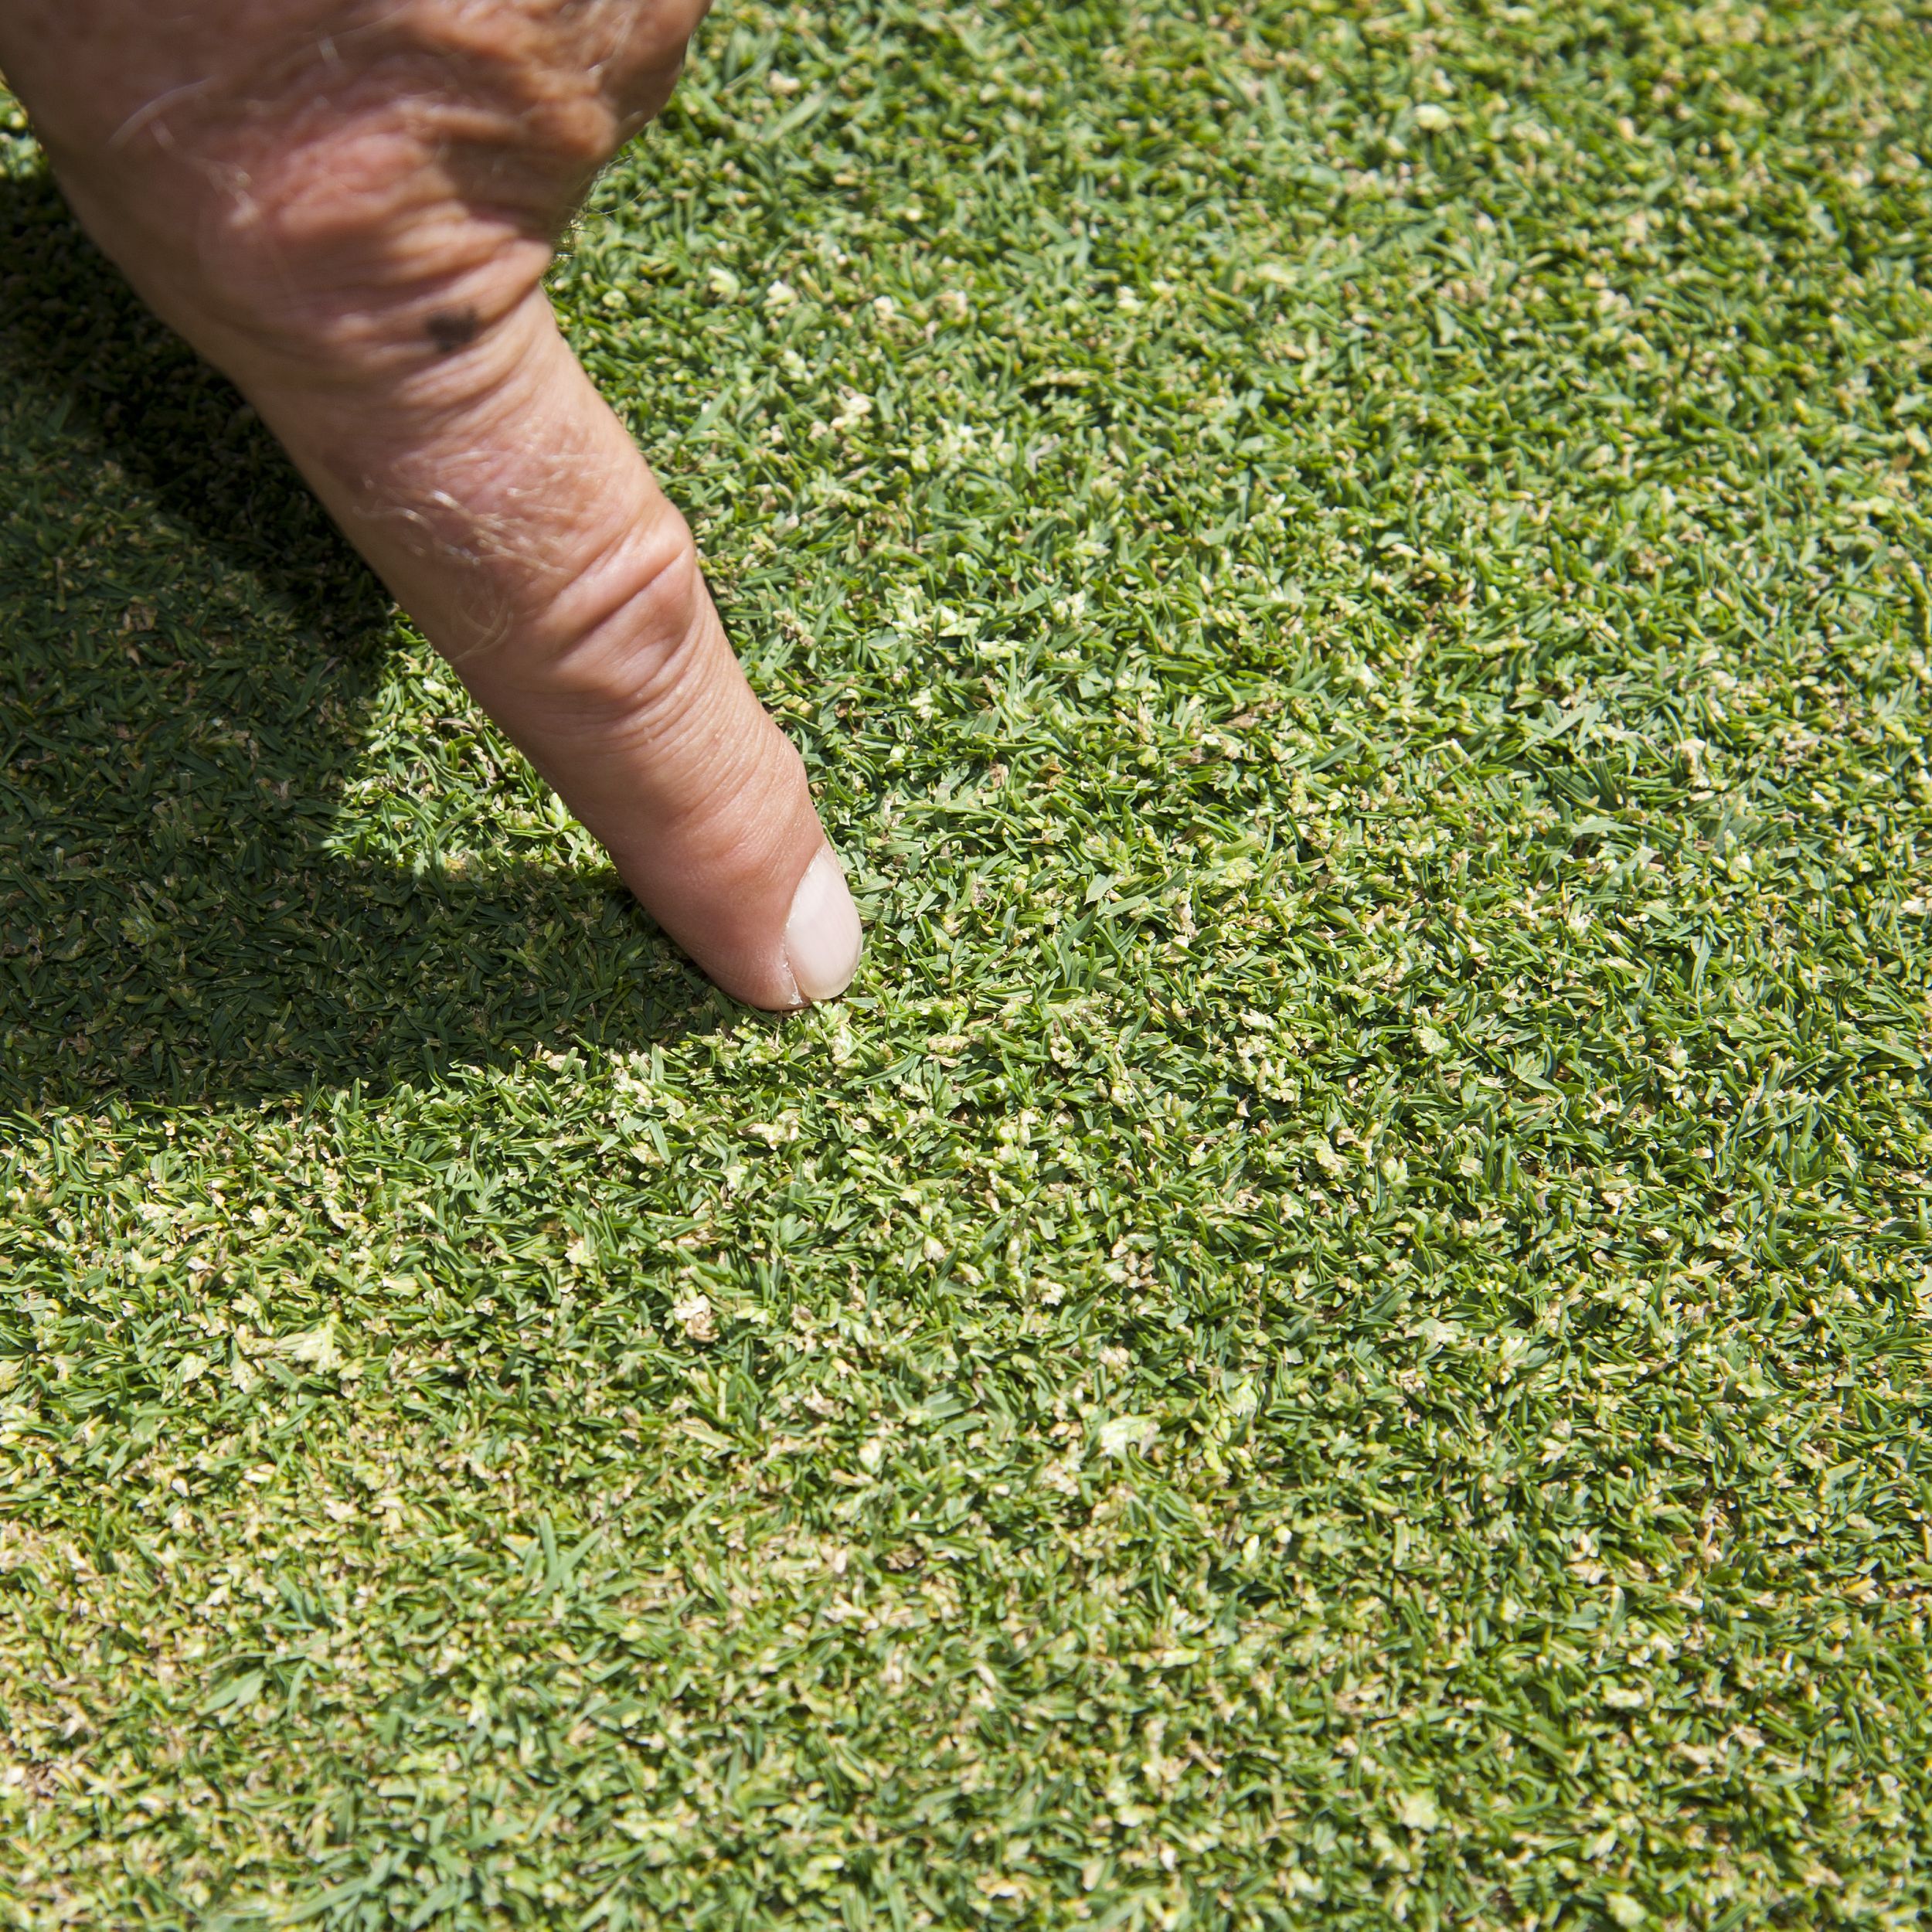 Golf courses' quiet invader is poa annua | The Spokesman-Review